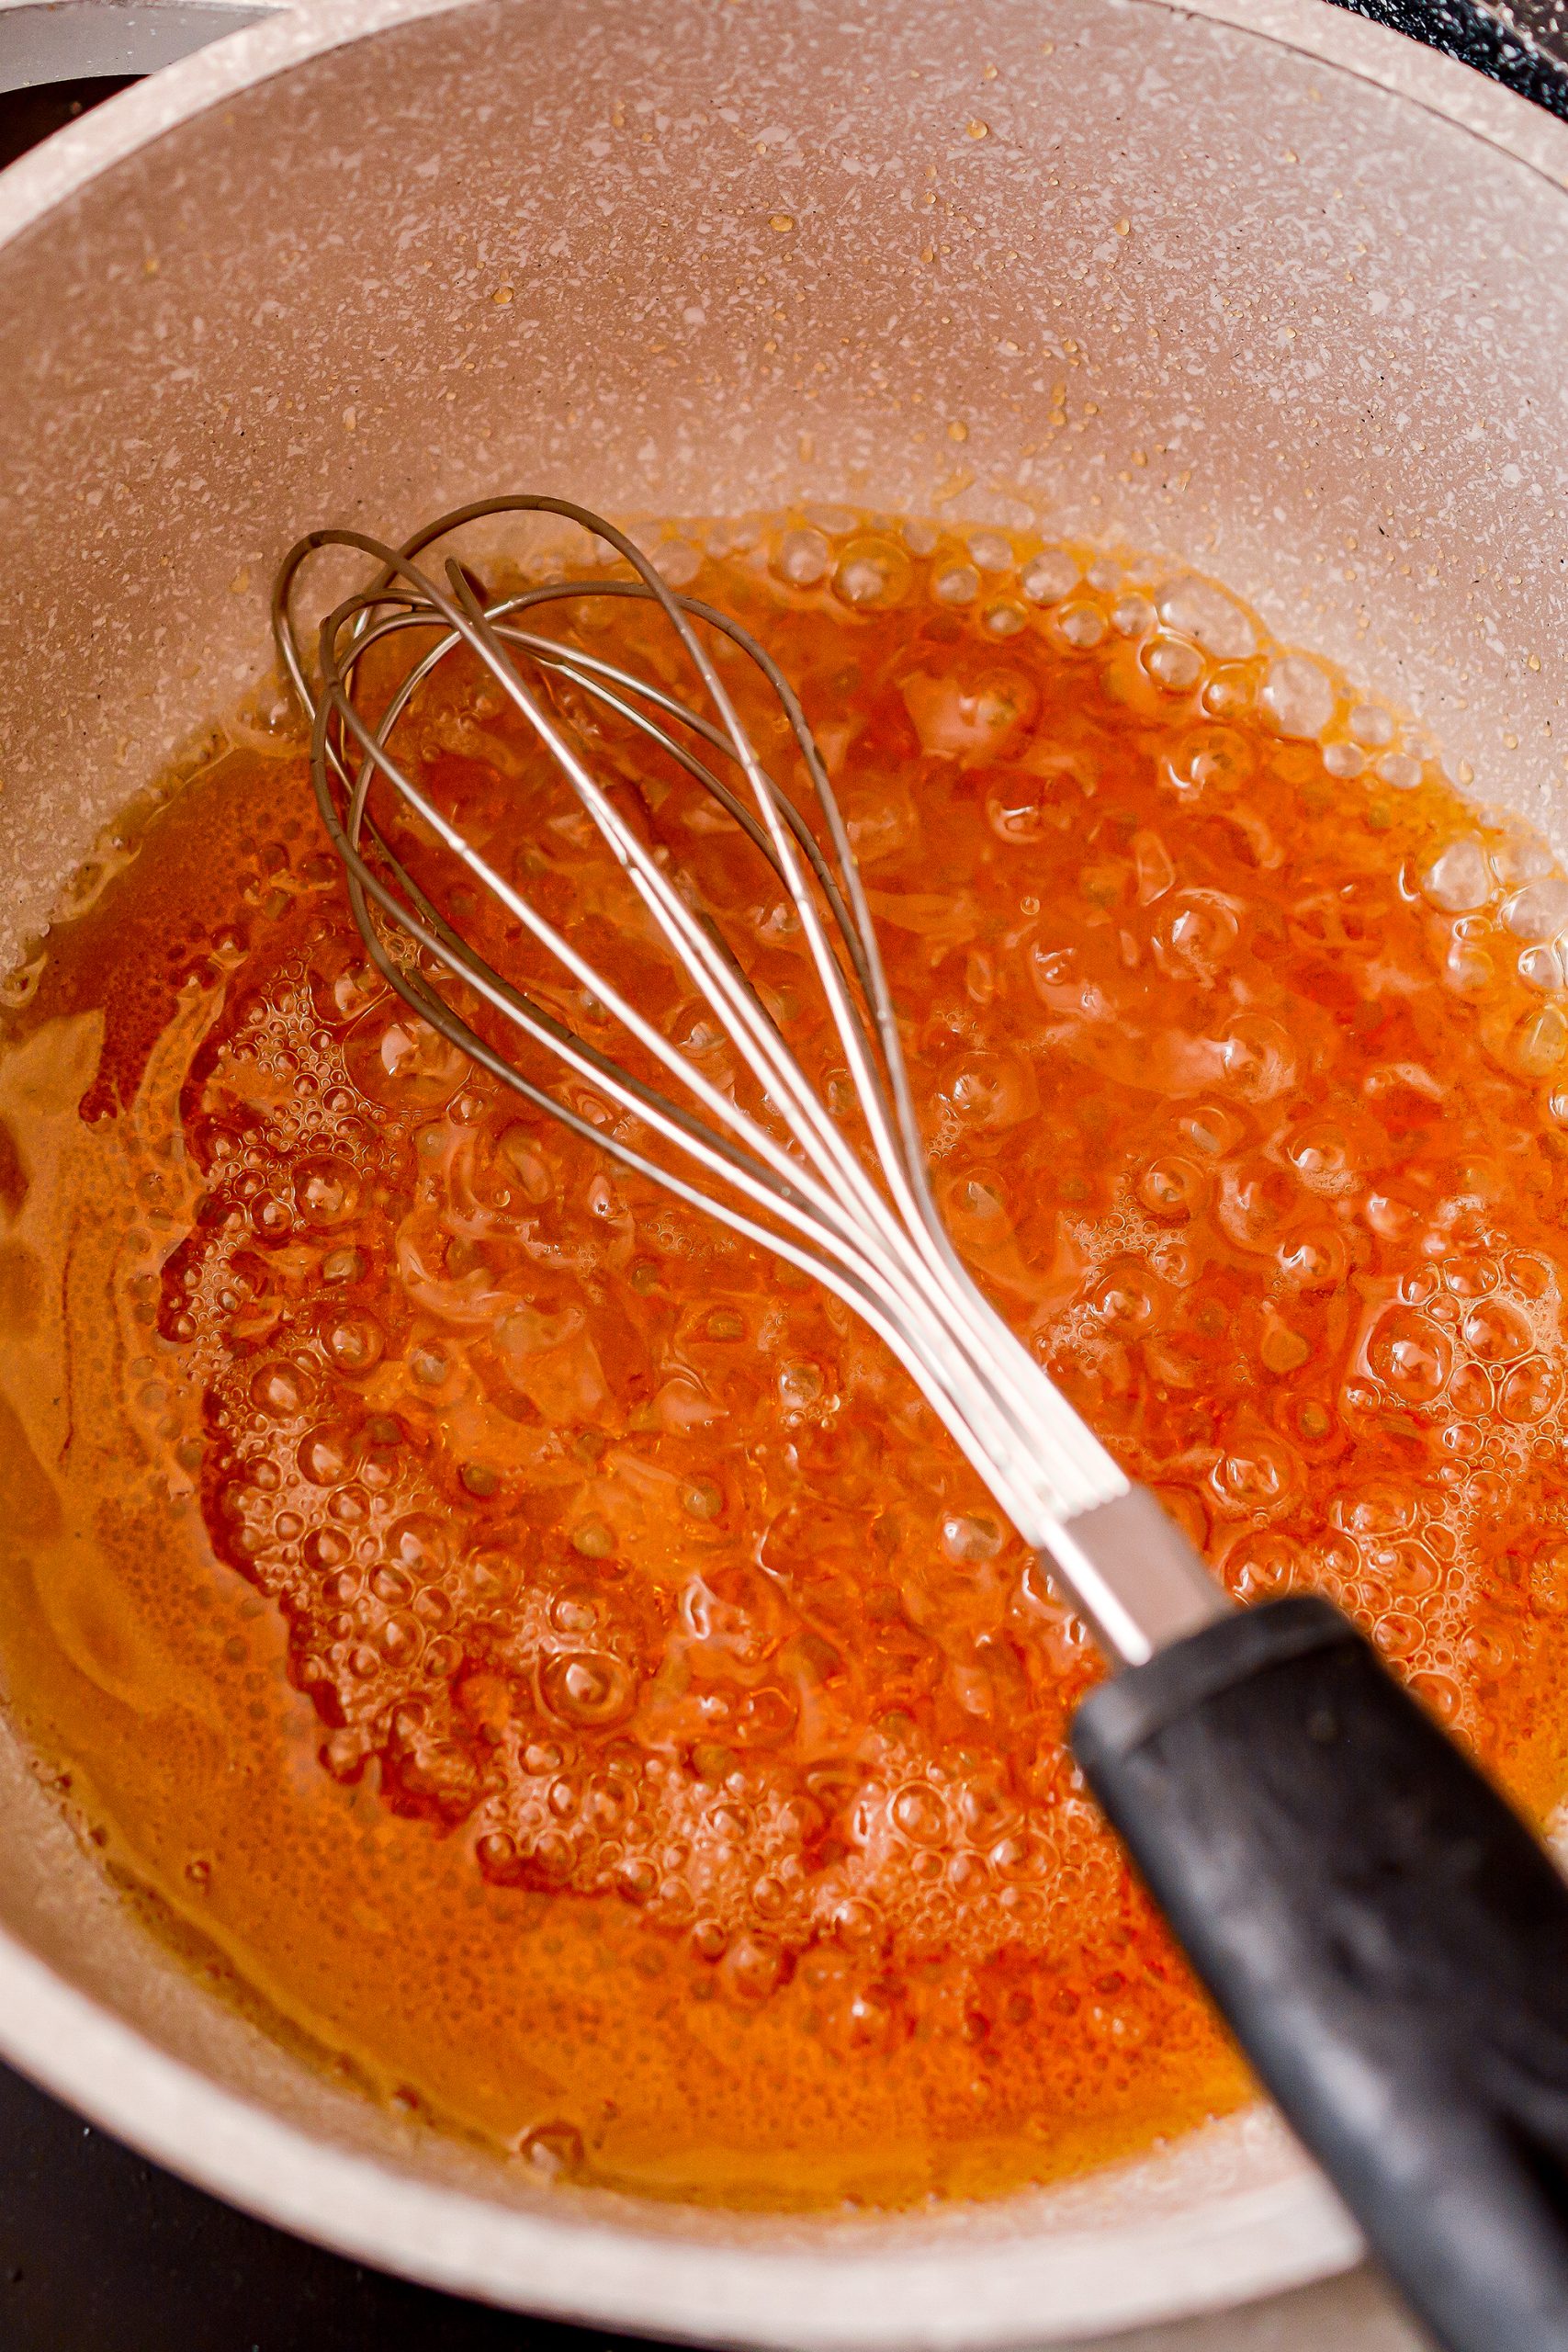 Place the maple syrup in a saucepan over medium high heat and bring to a low boil. Whisk often until the maple syrup darkens, thickens and reaches a temperature of 265 degrees.